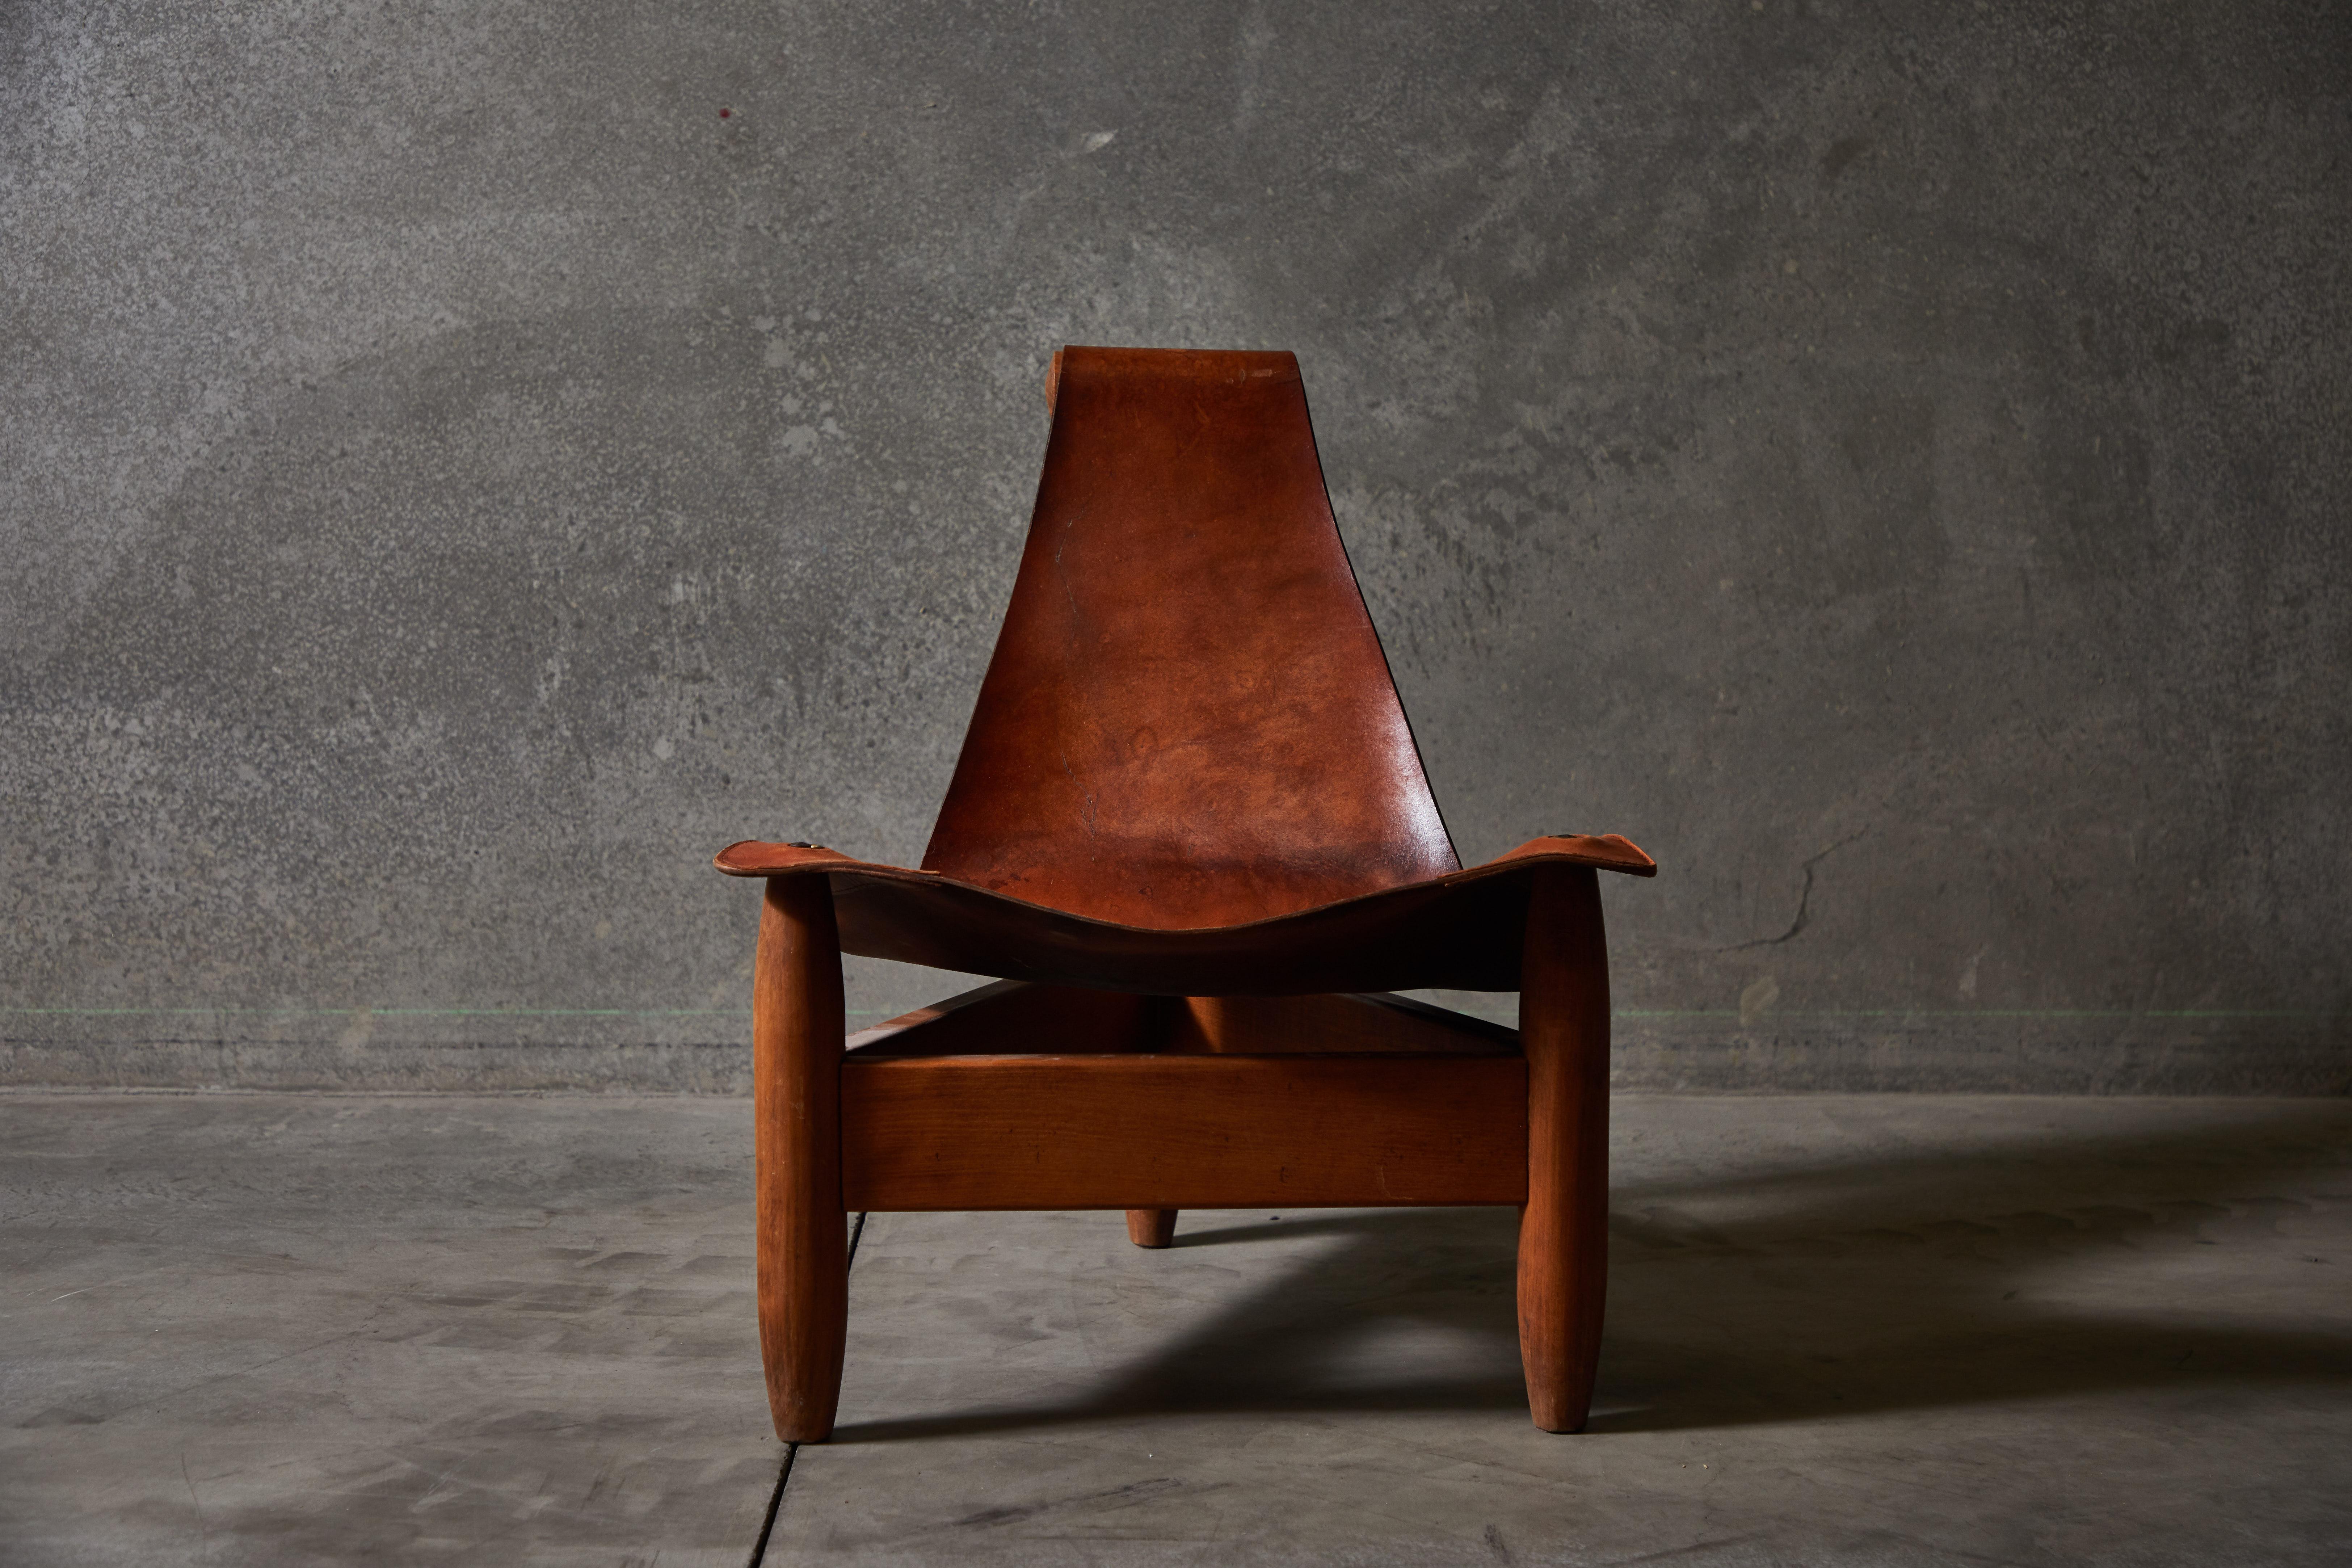 One of a kind patinated tripod cognac leather sling chair. Made in Sweden circa 1960s.